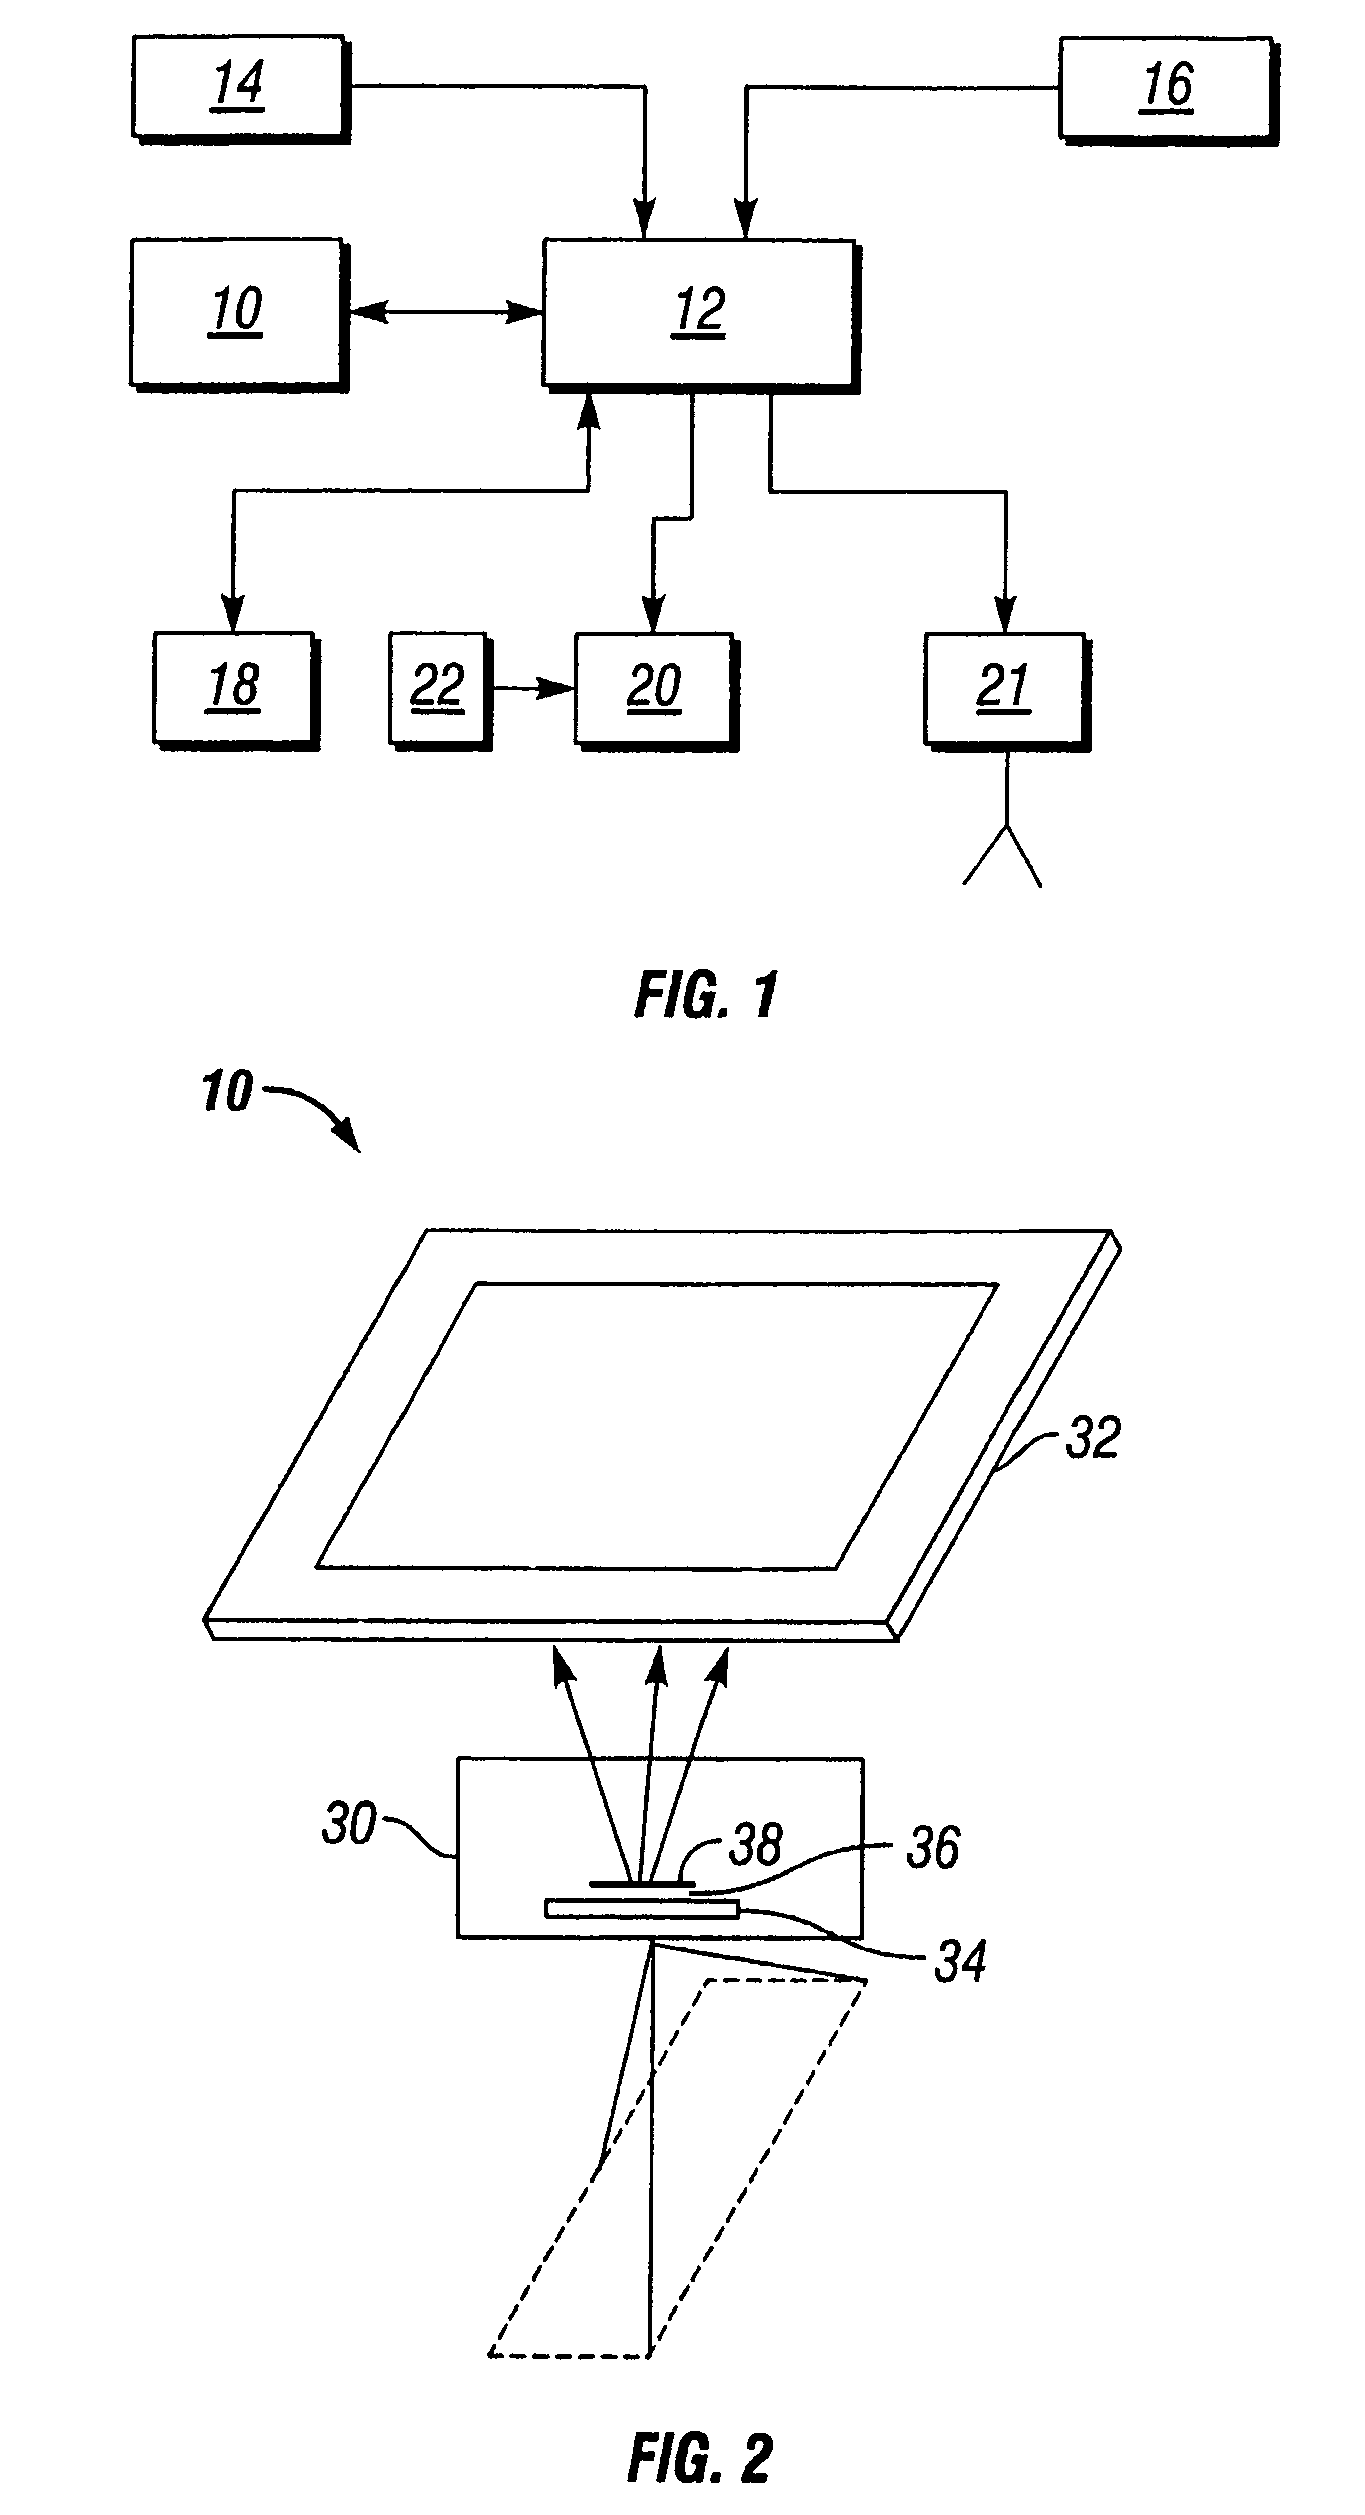 Method of using a self-locking travel pattern to achieve calibration of remote sensors using conventionally collected data